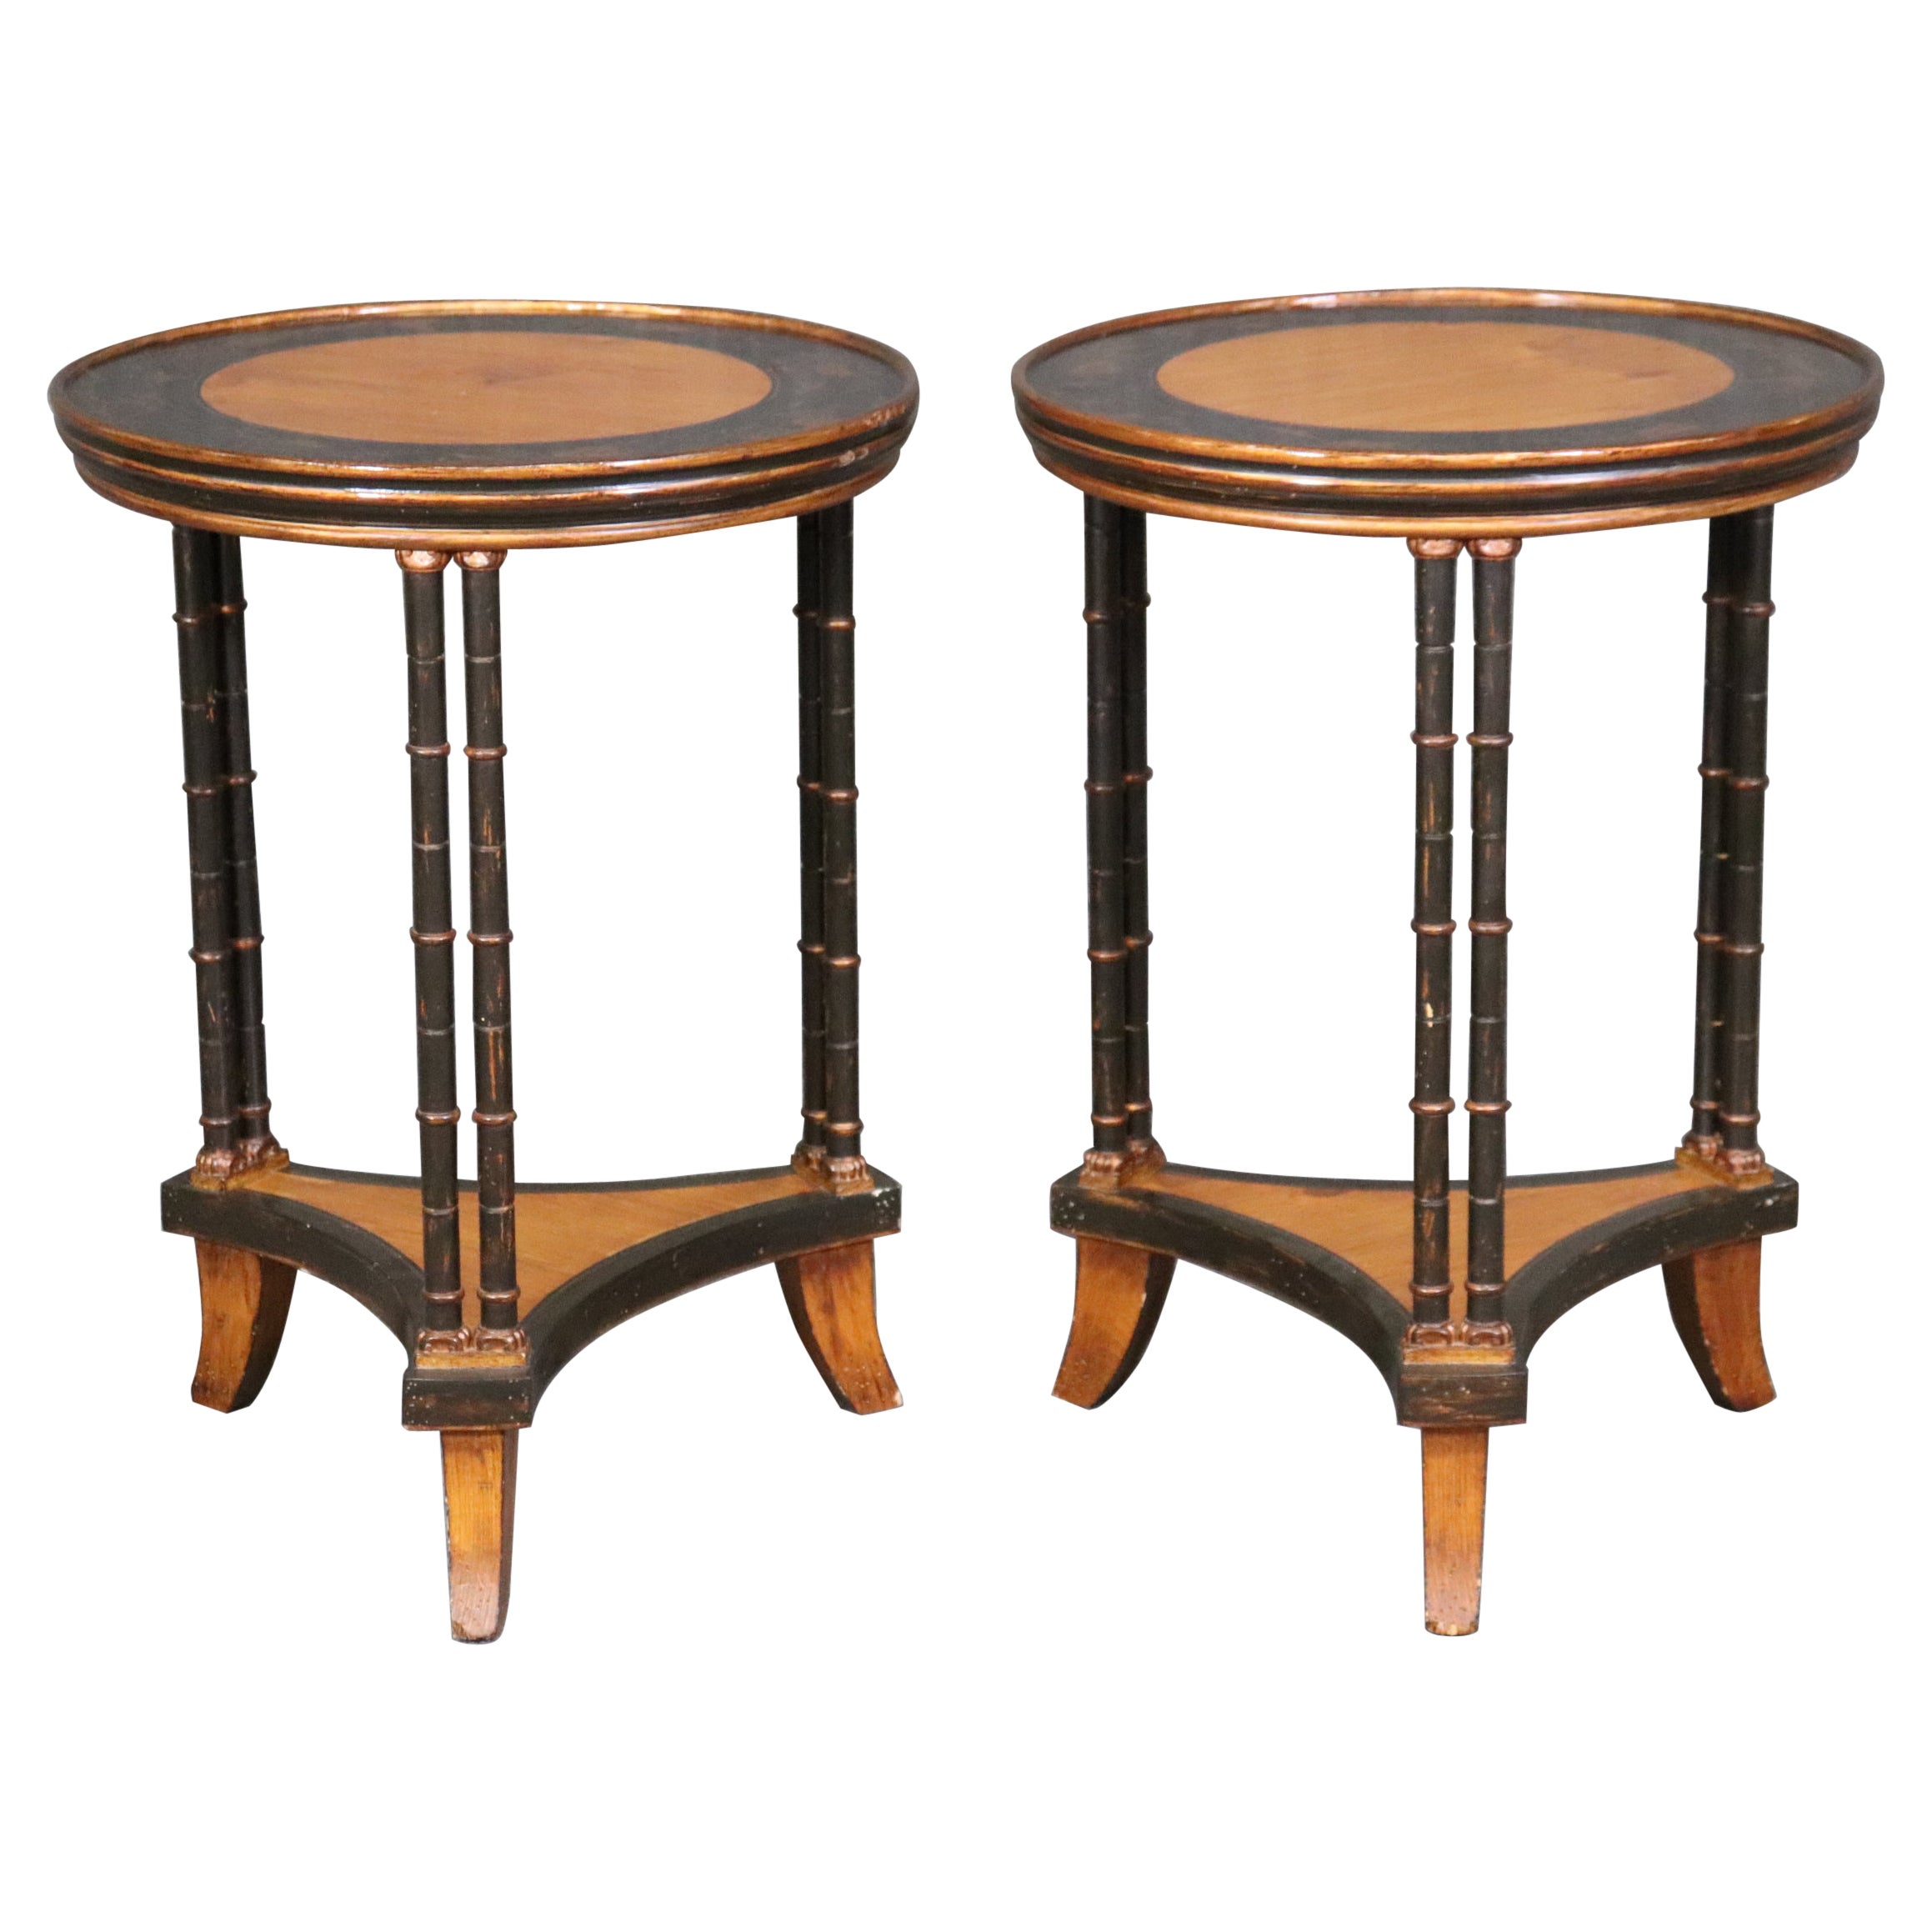 Pair of Chinoiserie Painted Faux Bamboo Yew Wood Gueridon Side Tables 